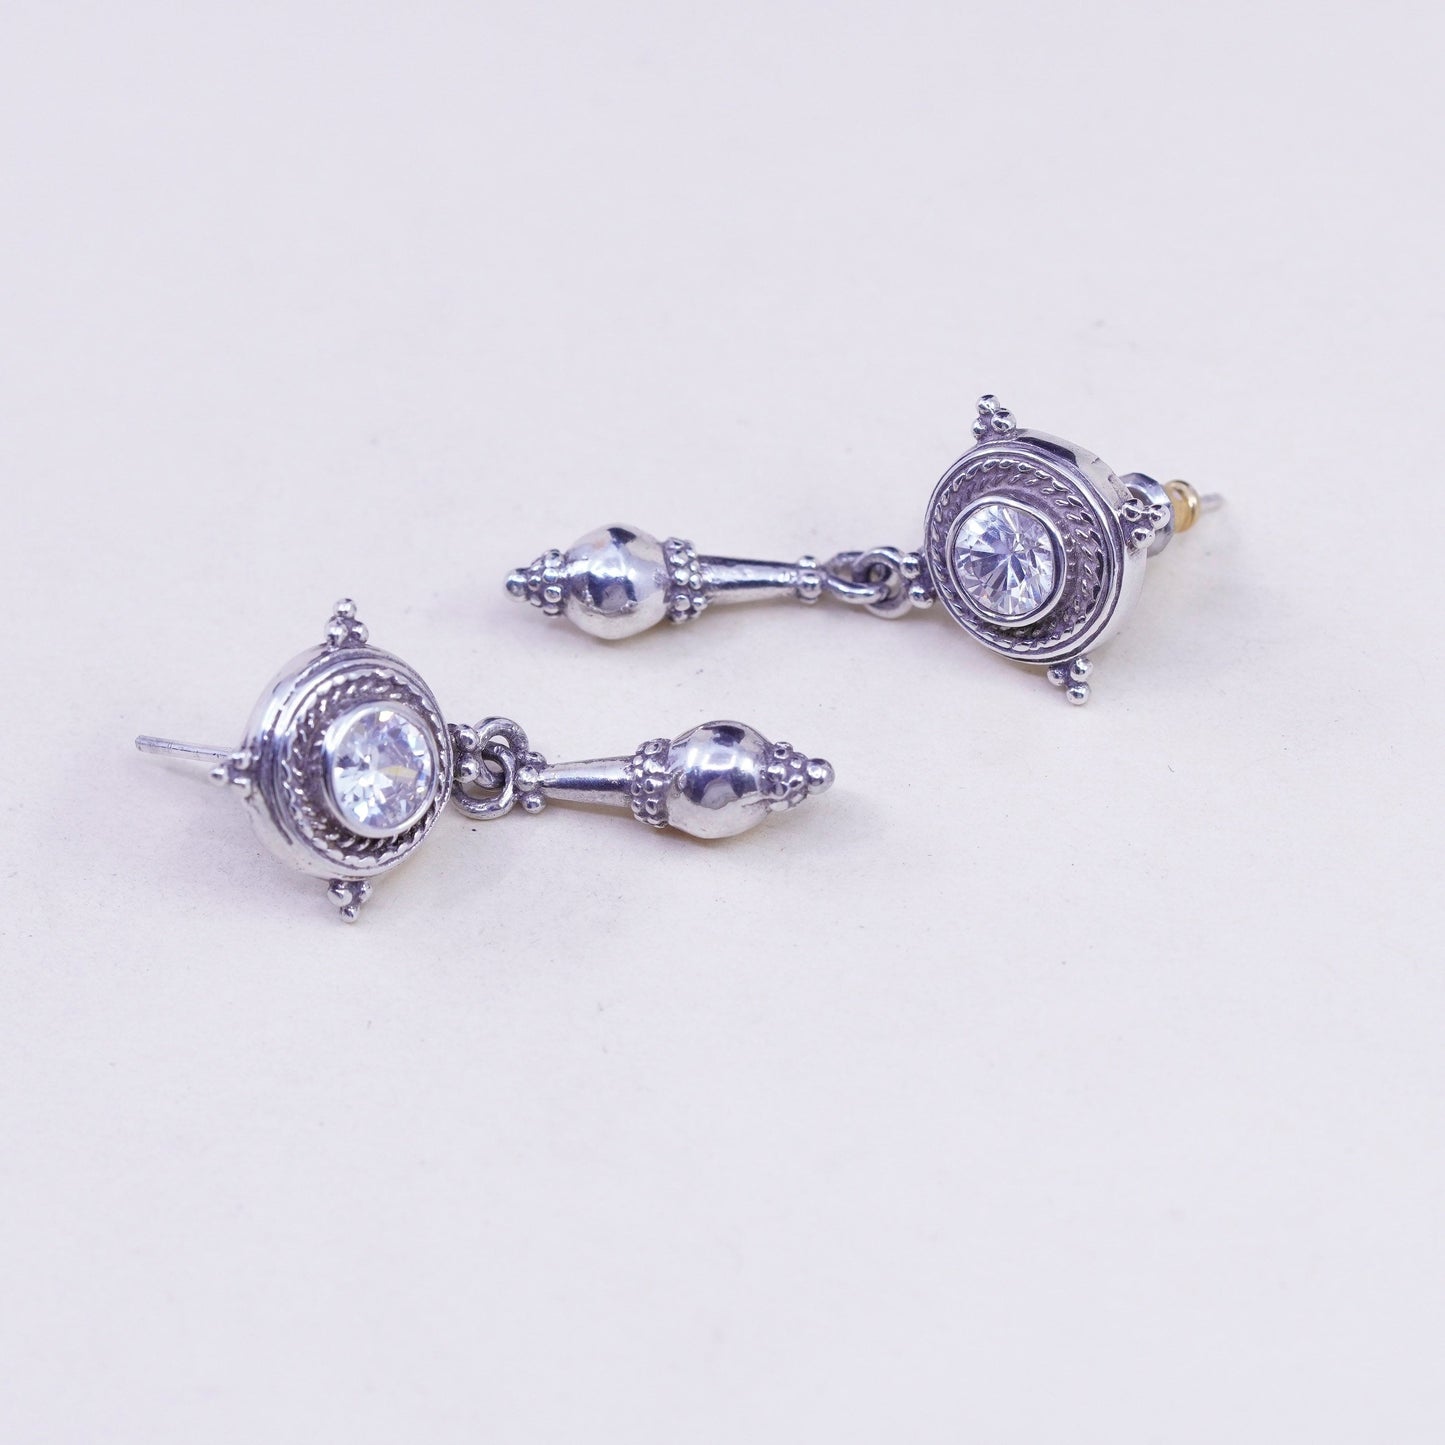 Vintage sterling 925 silver handmade earrings with round CZ and cable